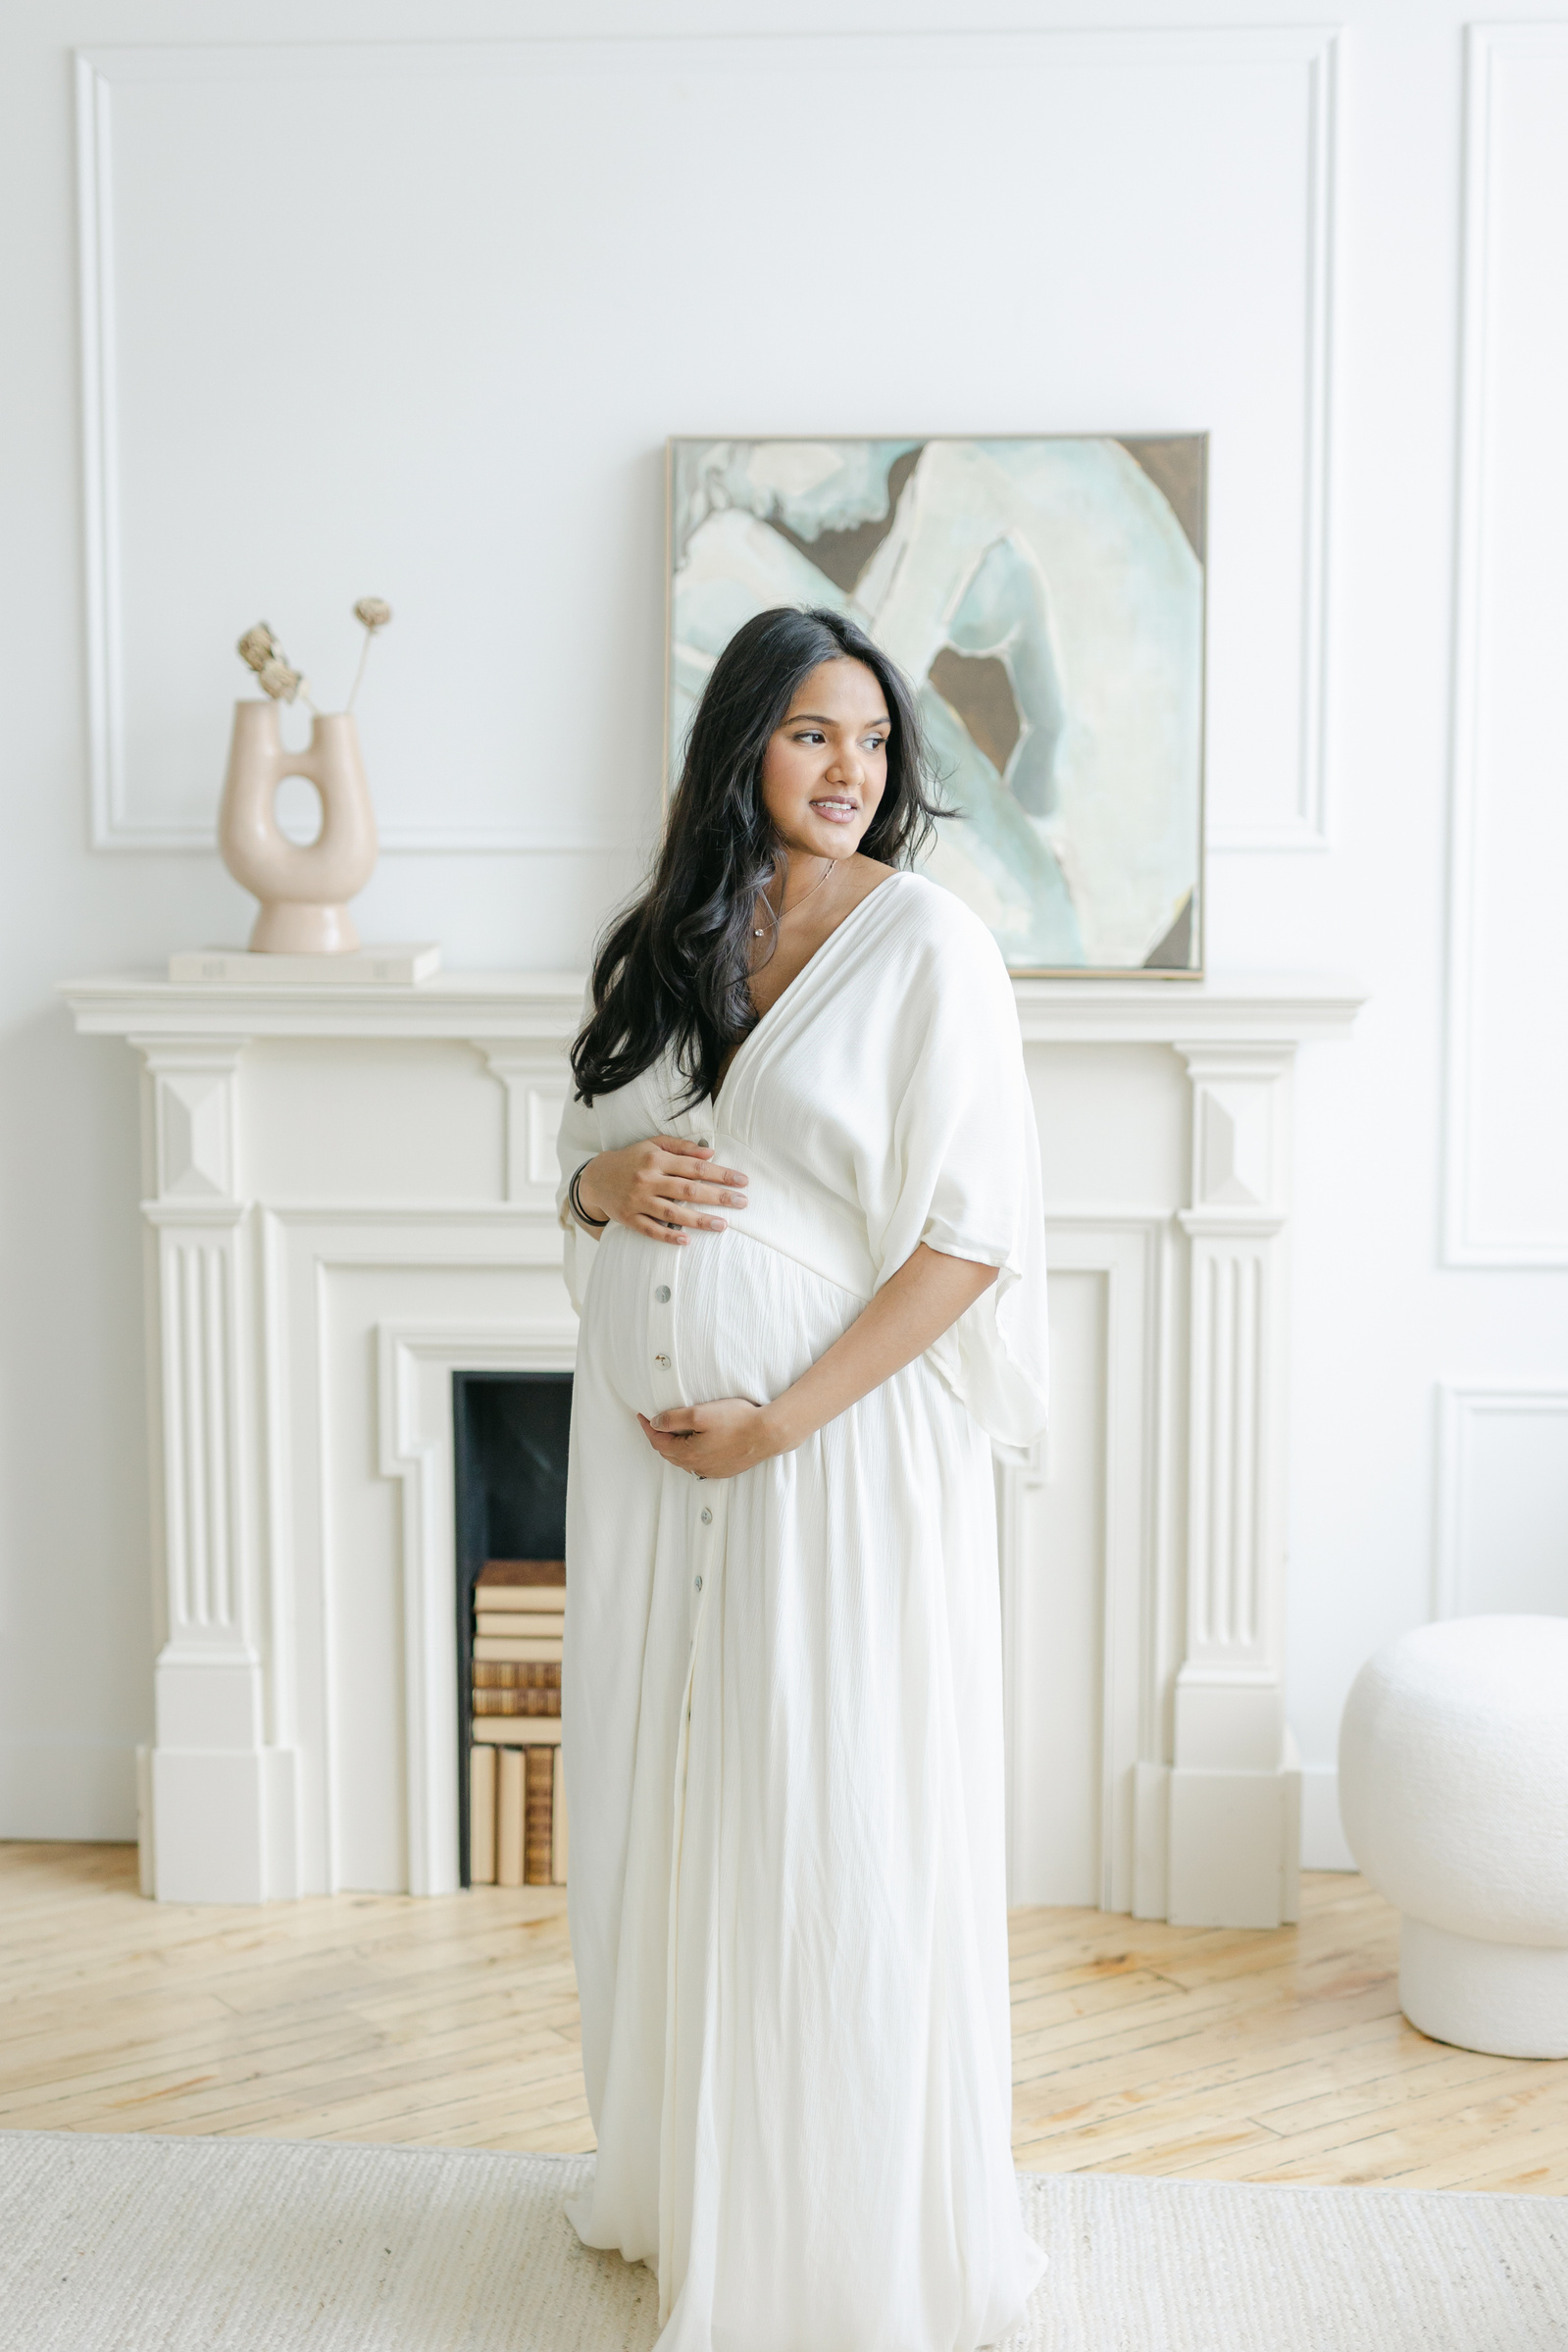 Pregnant woman holding belly in a white maternity dress